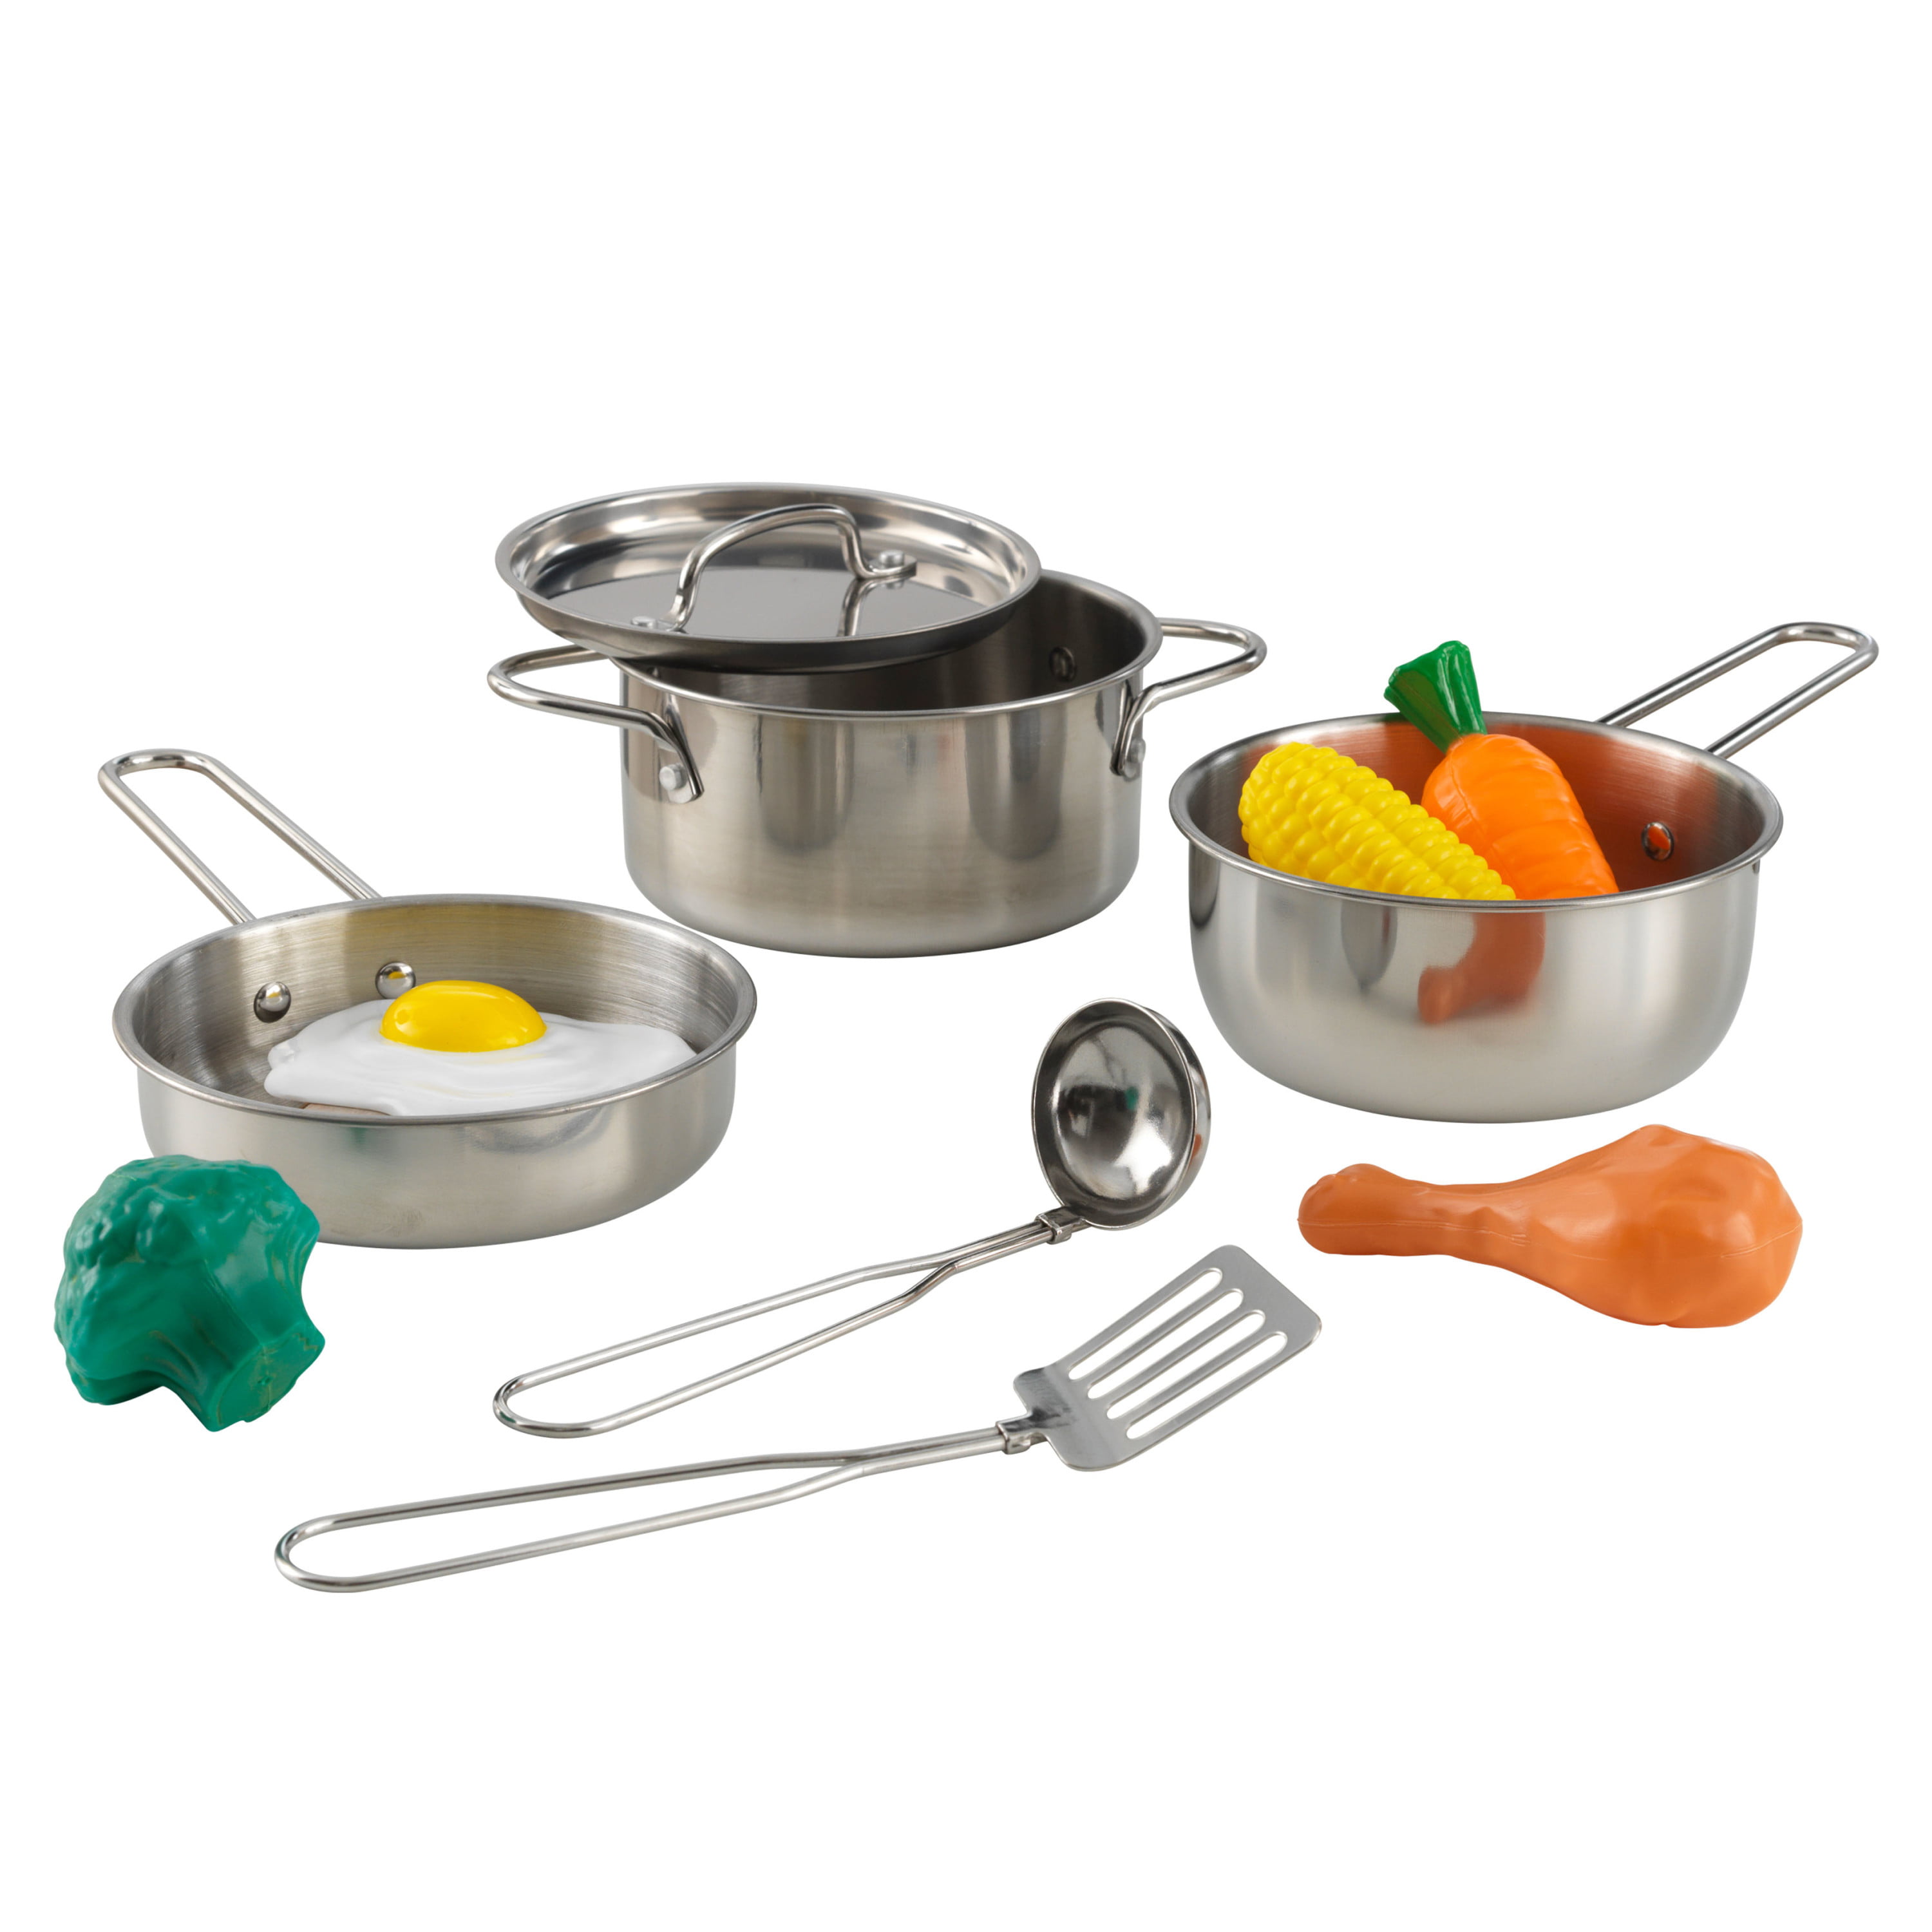 Deluxe Cookware set with Food by Kidkraft x 11 pieces 